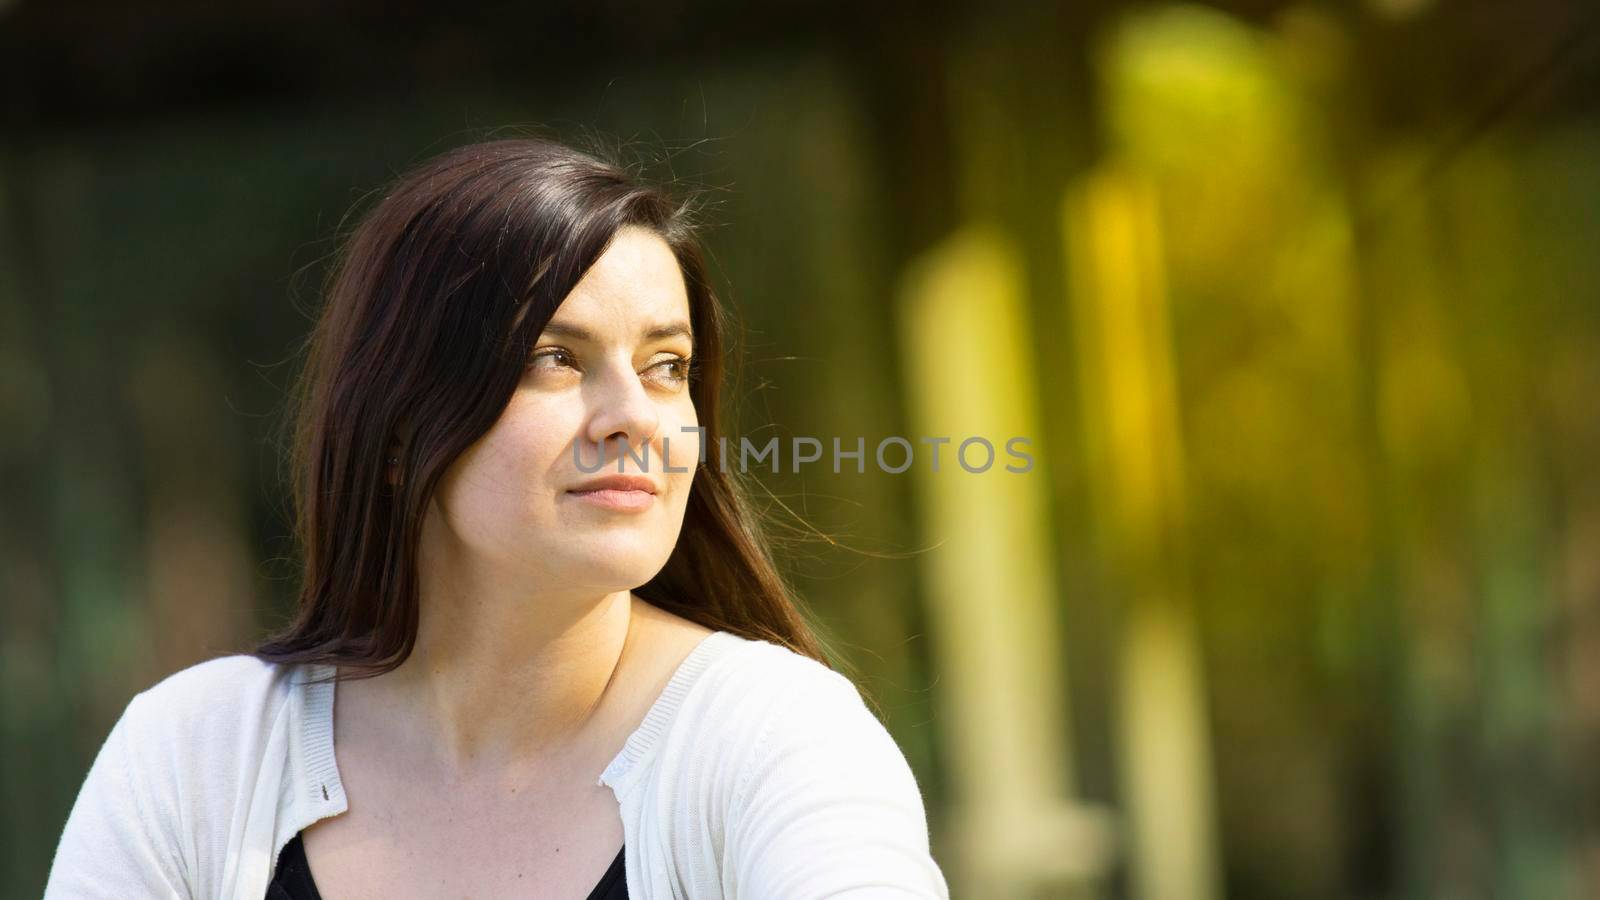 Portrait of beautiful Hispanic young woman with long hair looking to the right against a background of unfocused trees during sunset with copy space